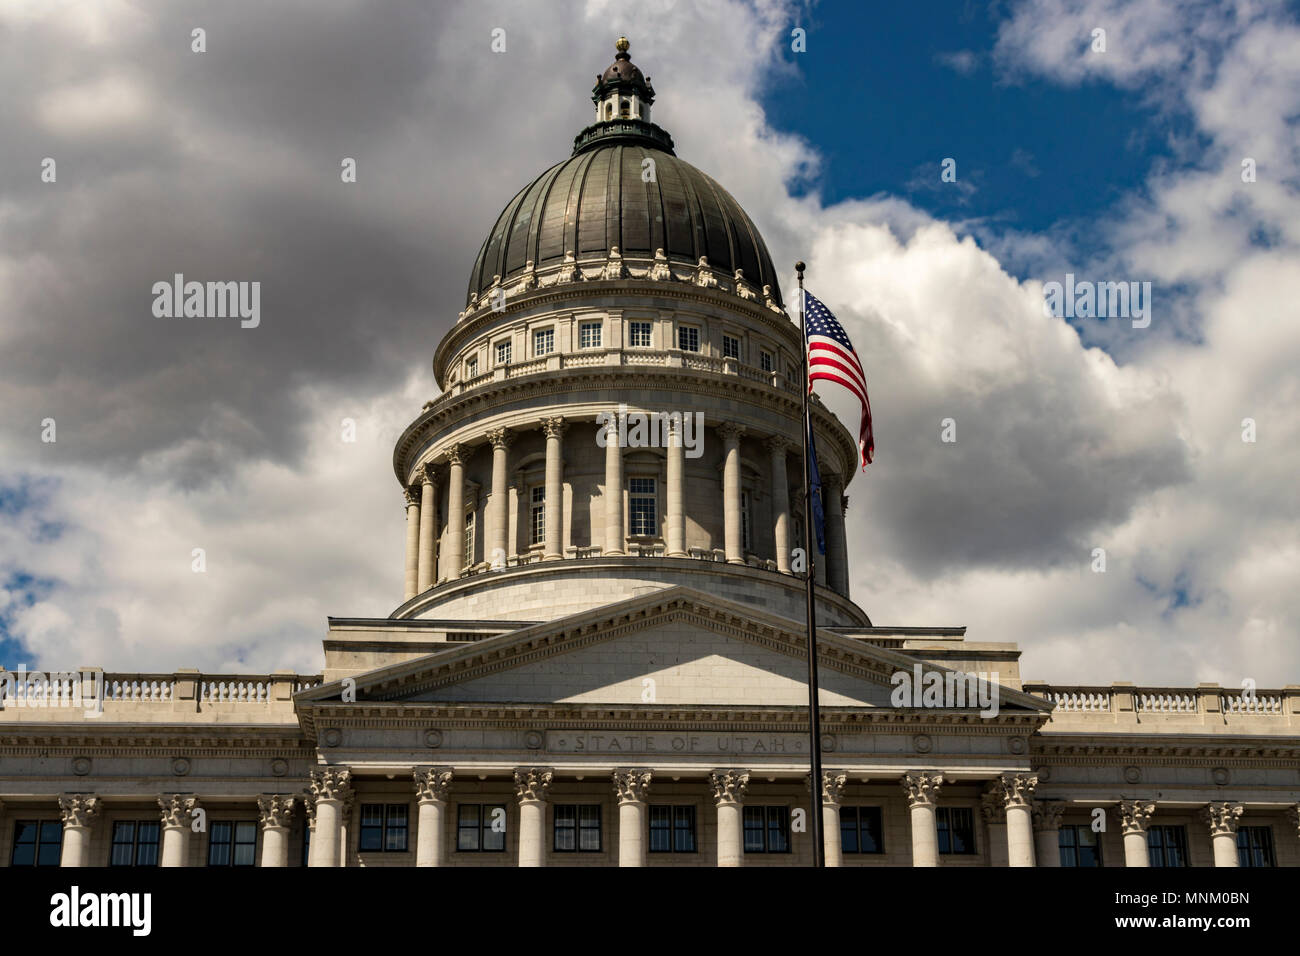 Dome of the Capital Building in early summer, State of Utah, Salt Lake City, Utah, USA. Stock Photo